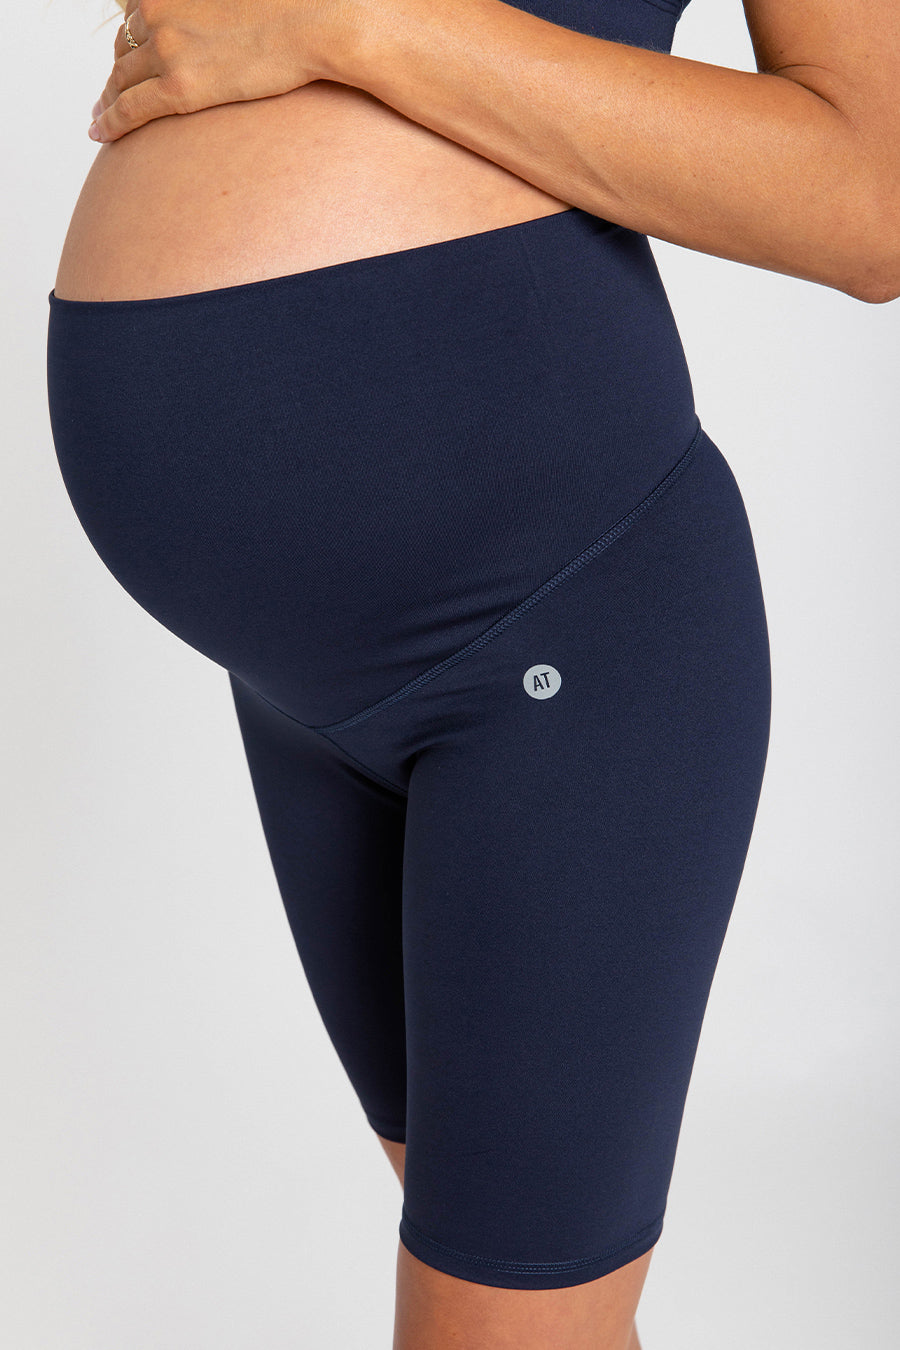 Mama Pregnancy Bike Short - Midnight Blue from Active Truth™
